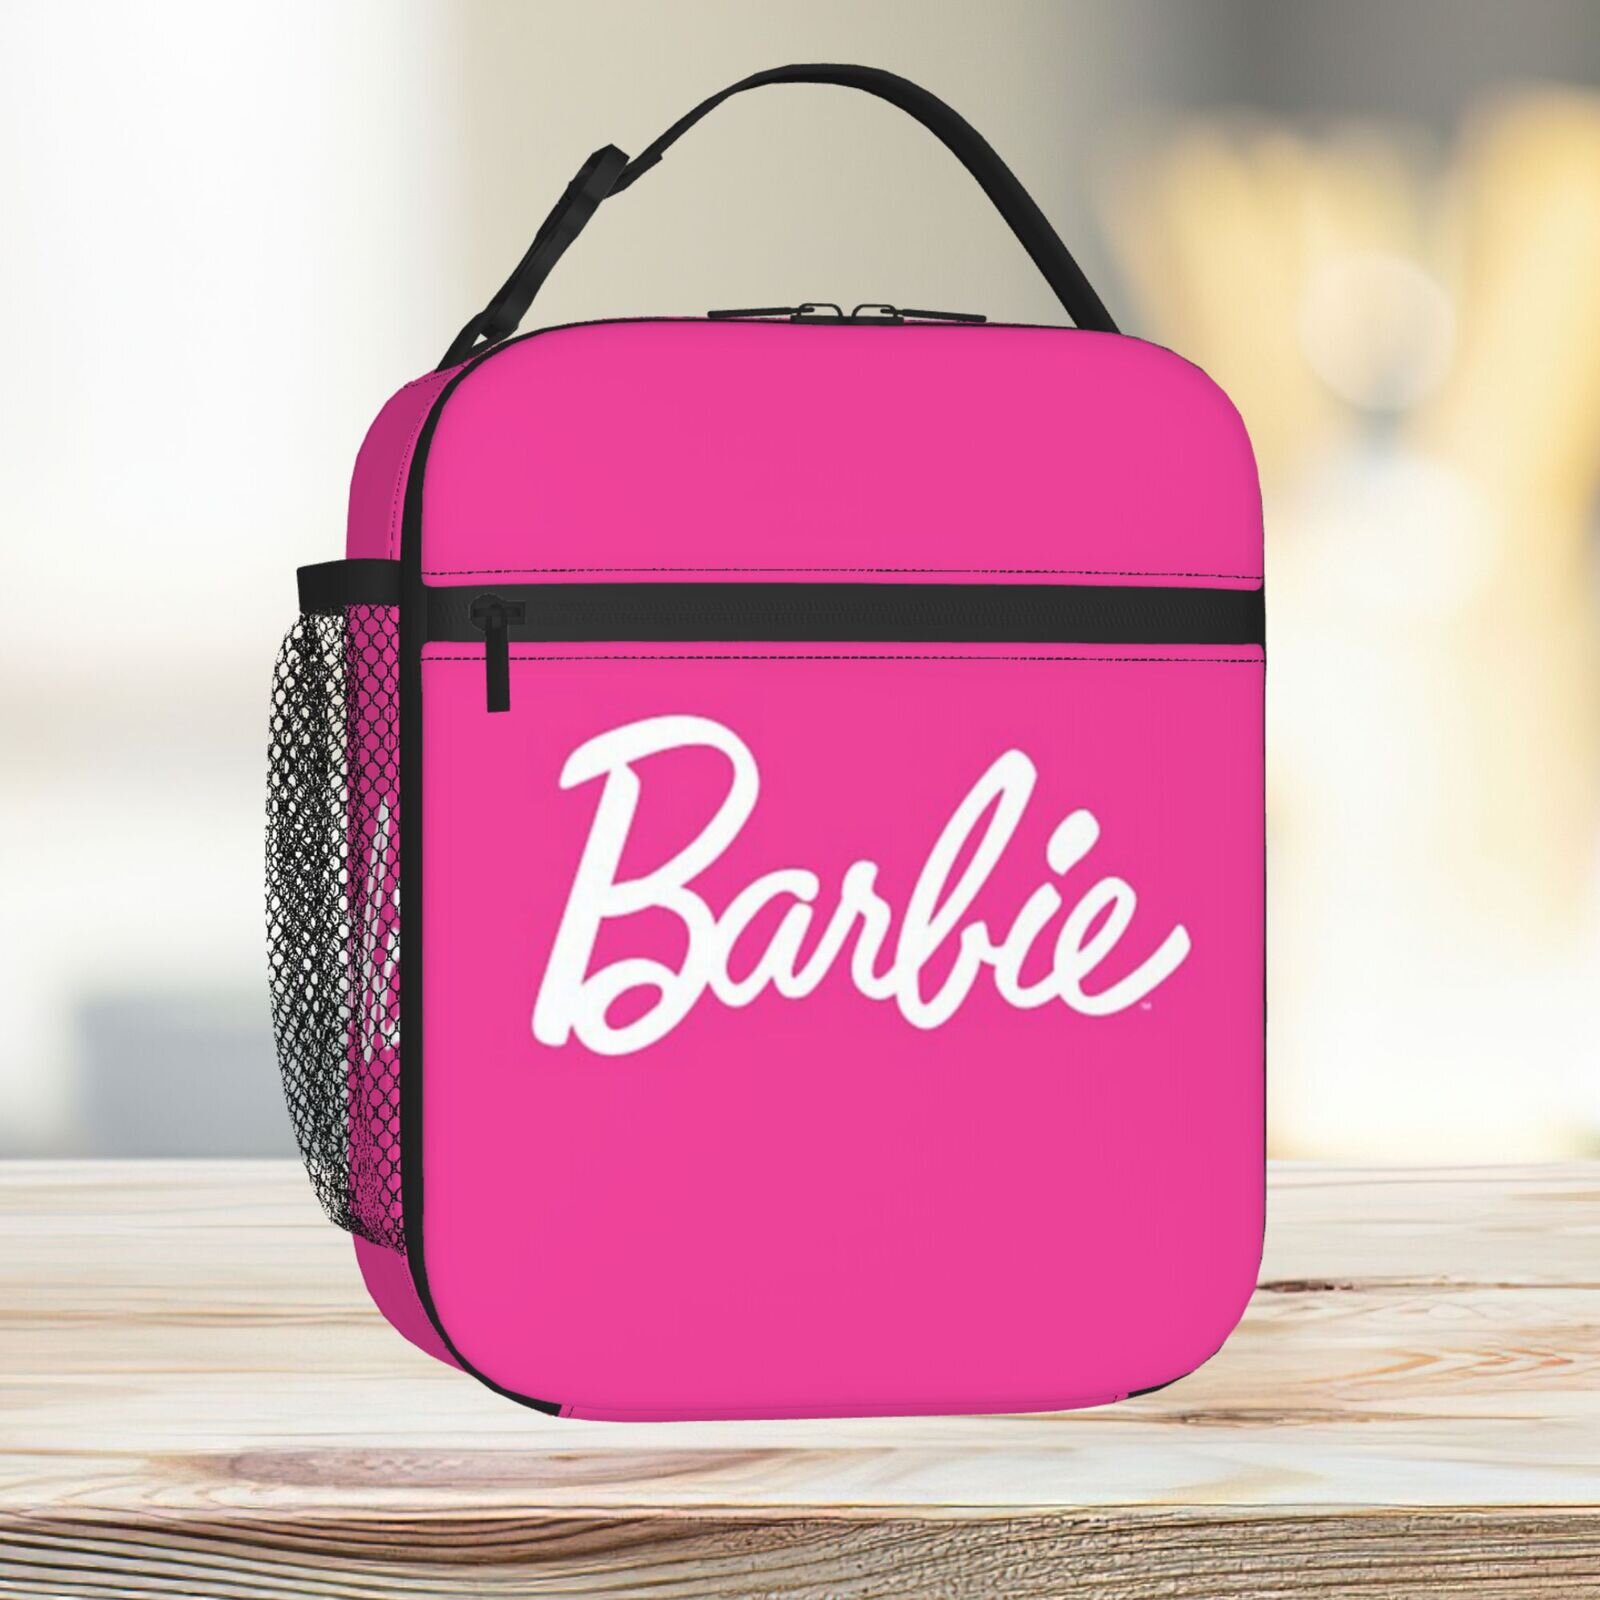 Lunch Bag Barbie Logo Tote Insulated Cooler Kids School Travel